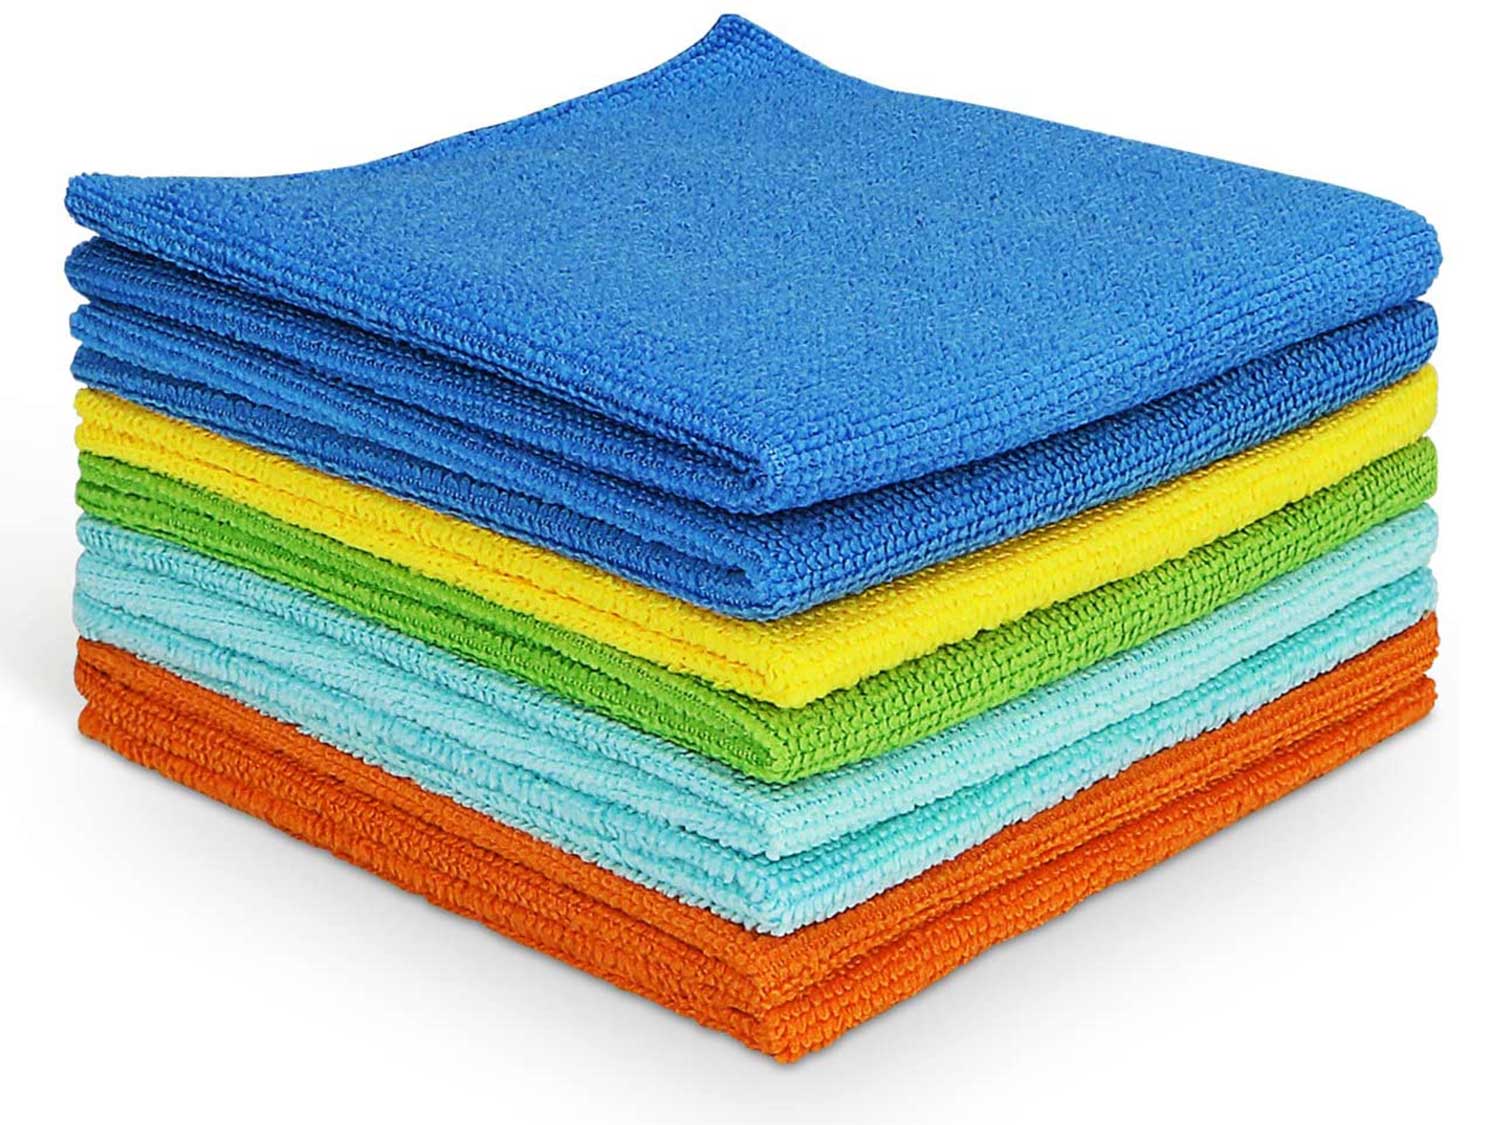 AIDEA Microfiber Cleaning Cloths Softer, More Absorbent, Lint-Free, Wash Cloth for Home, Kitchen, Car, Window